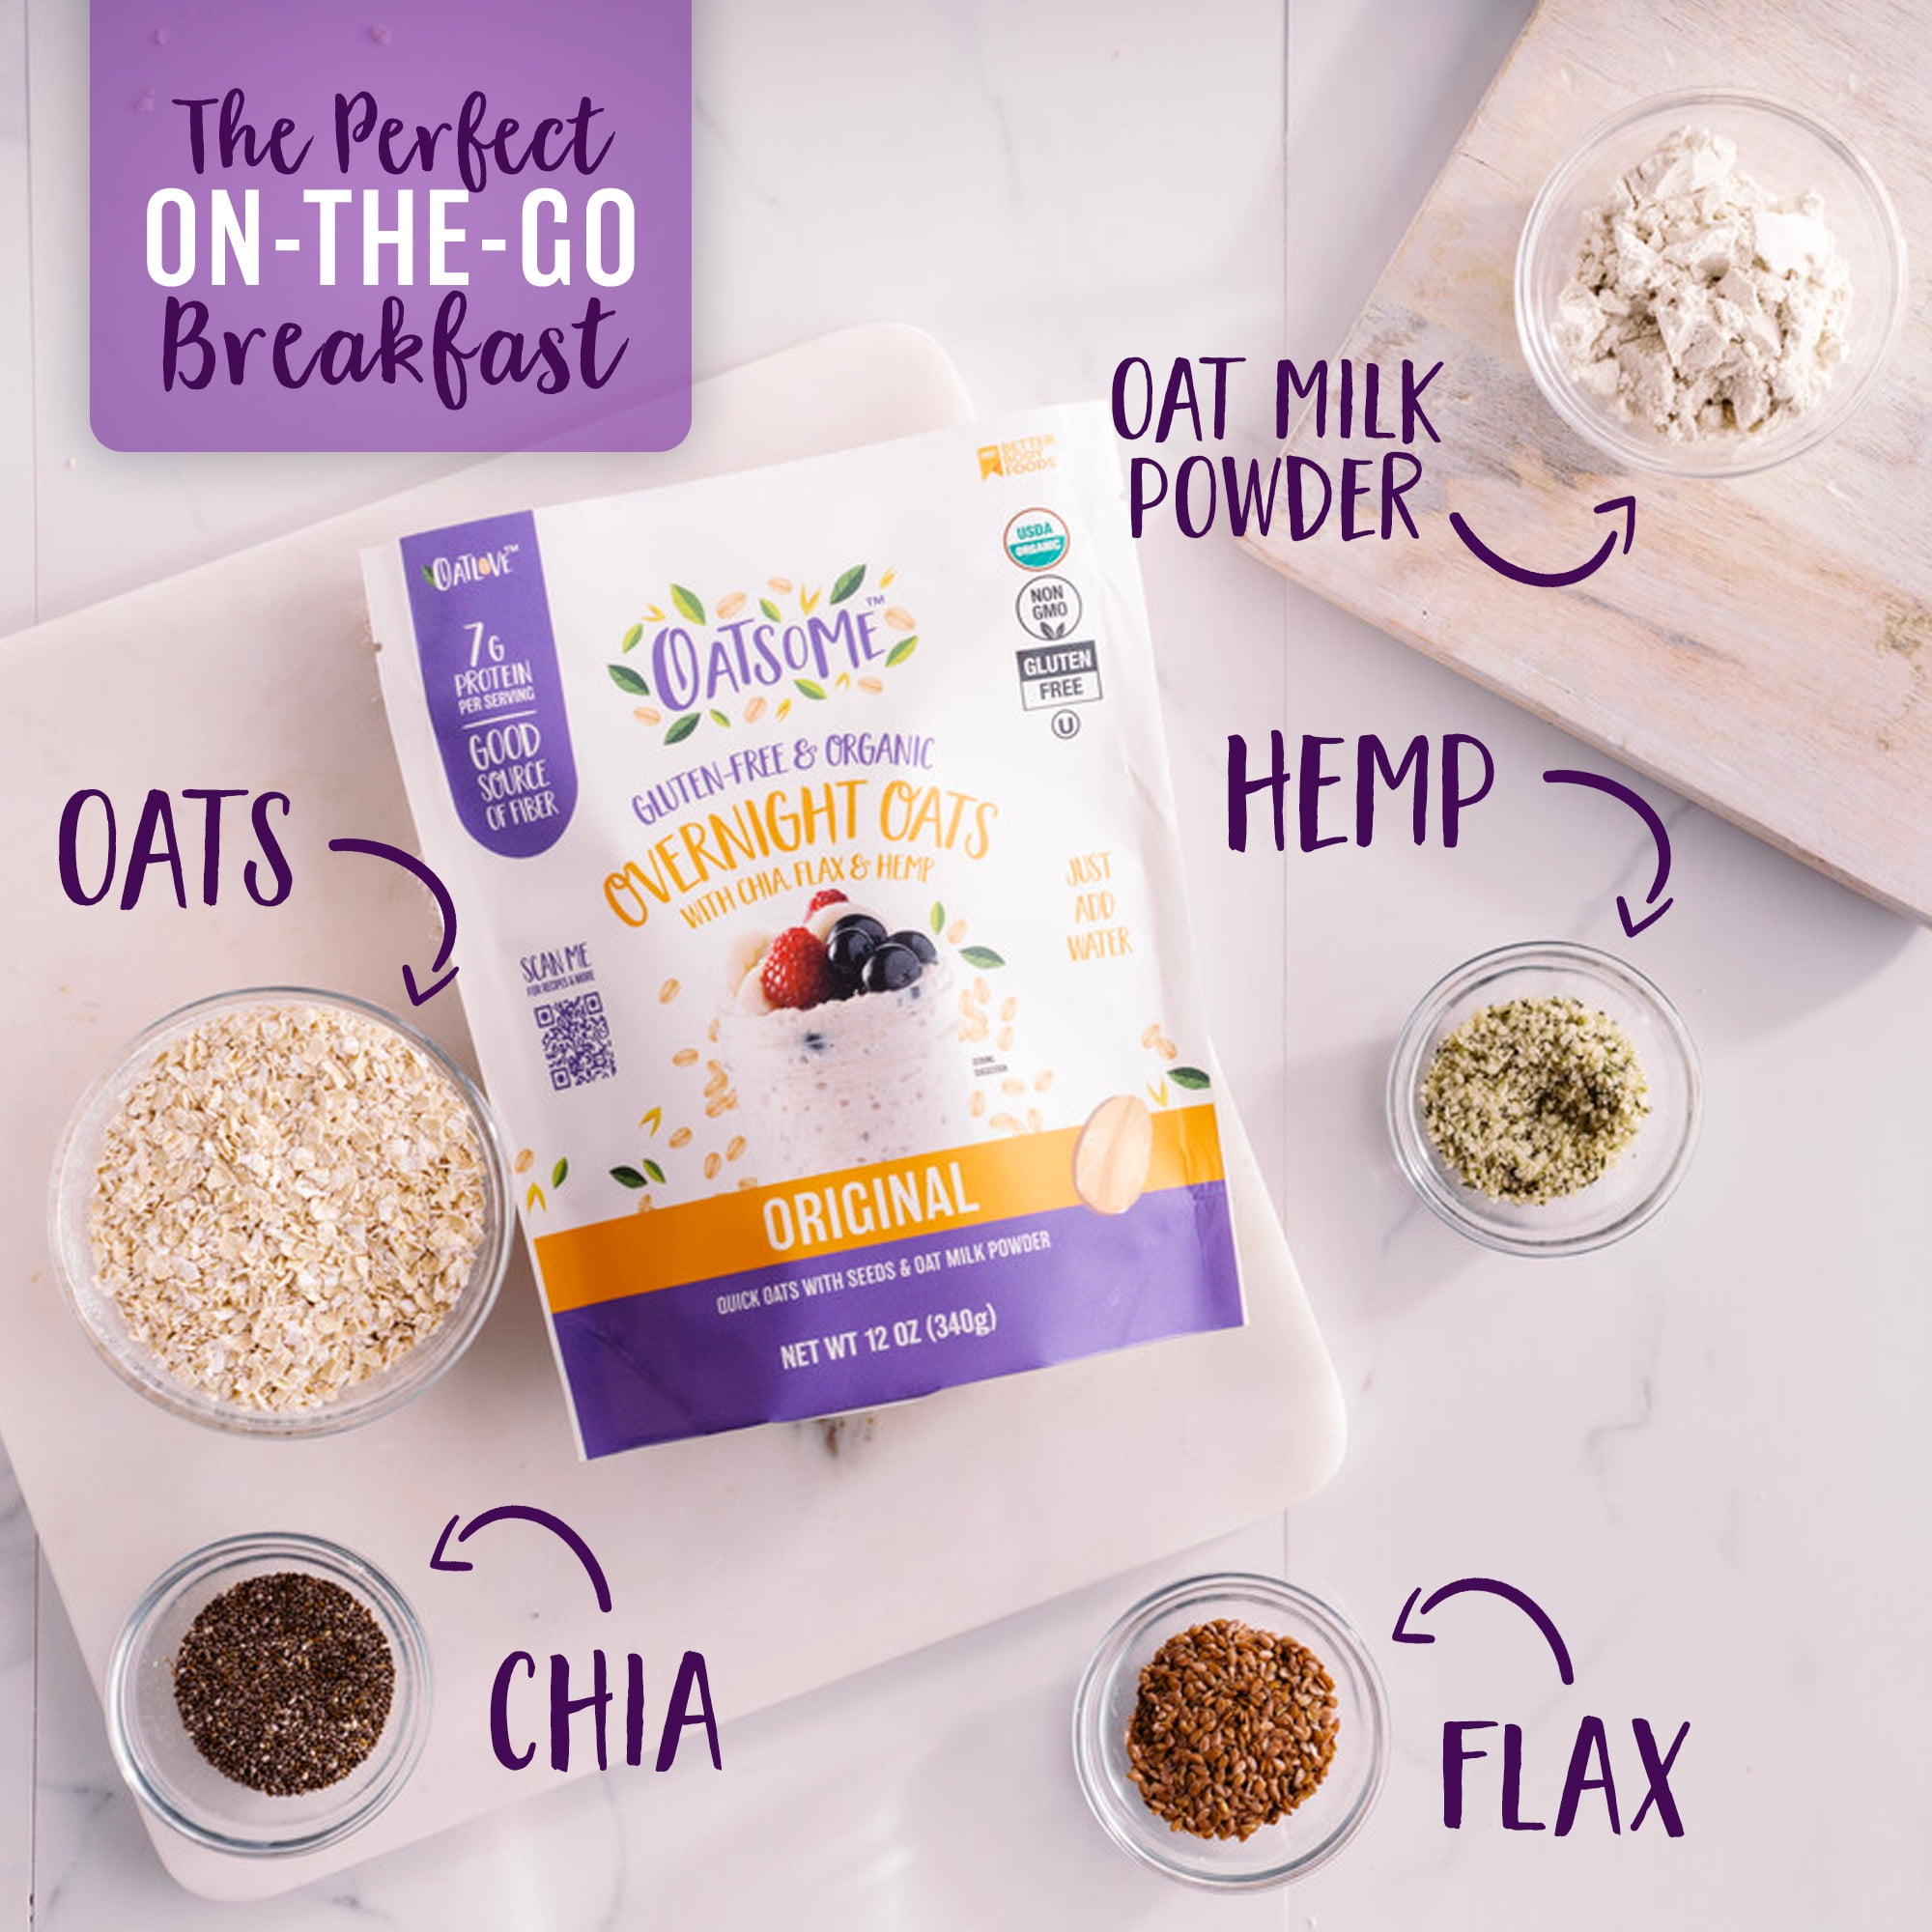 You heard that right! Your (new) favorite breakfast can be found at select  Walmarts across the country 🙌🏻 If you haven't tried the Oats Overnight  Shakes, By Oats Overnight